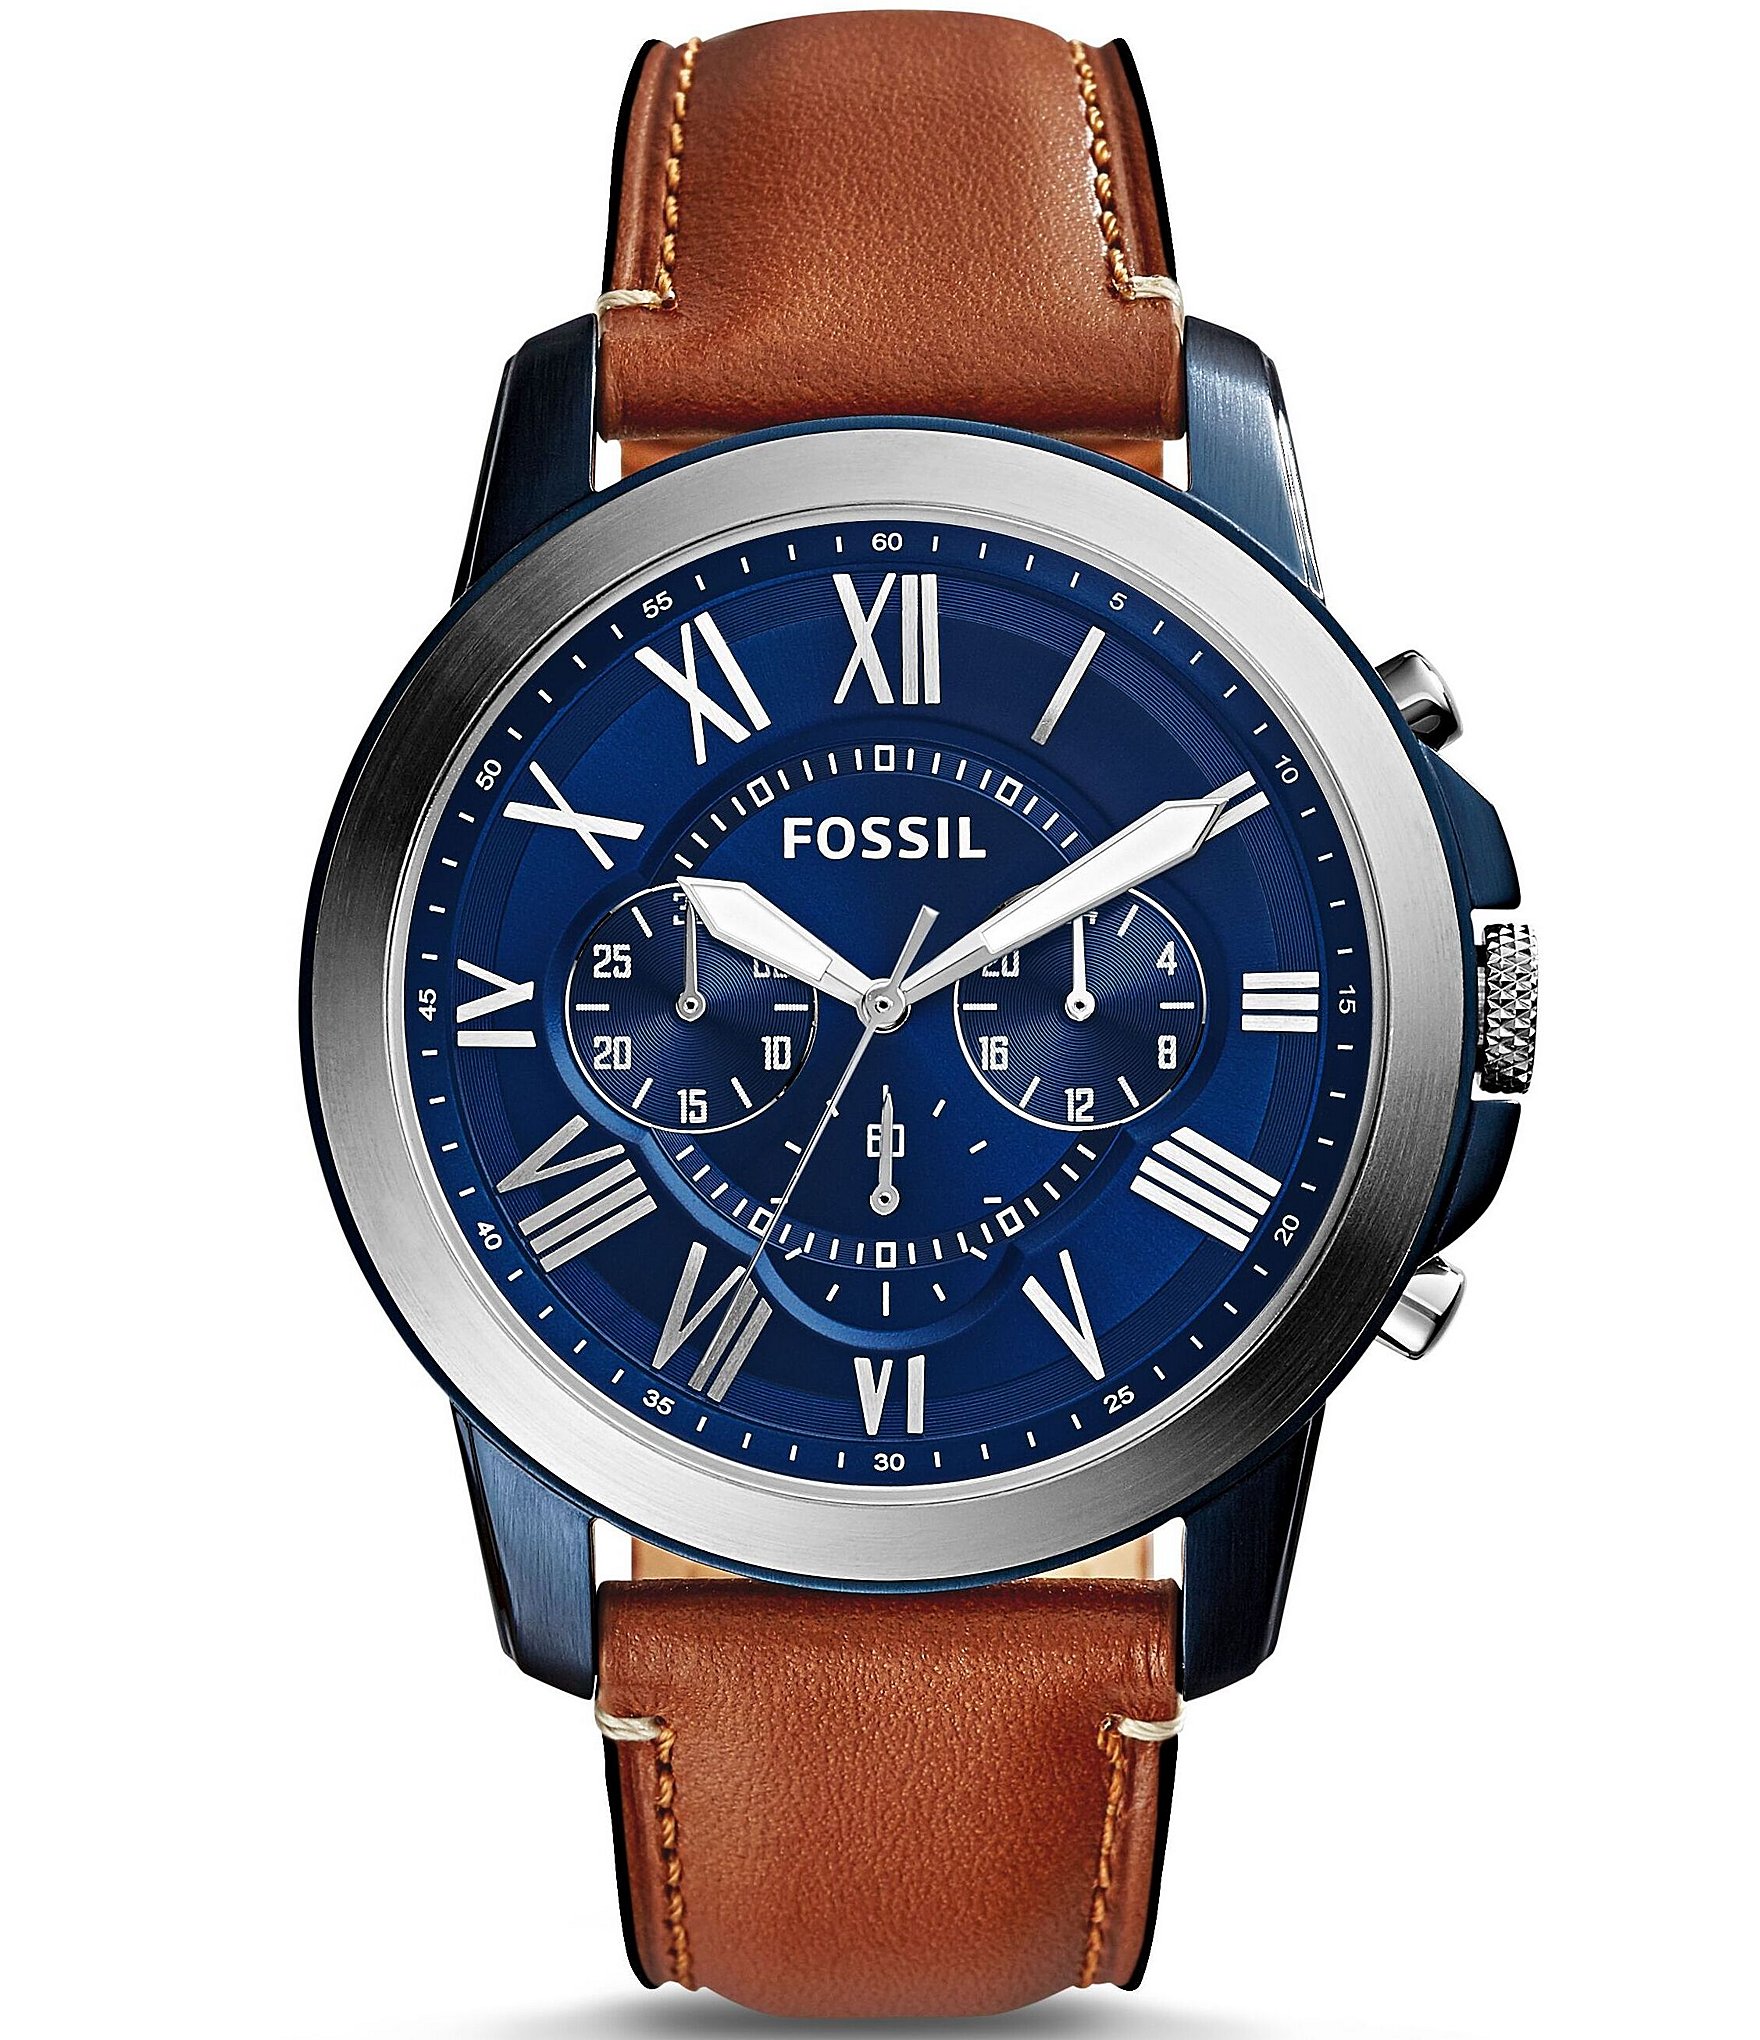 FOSSIL FS4656] What's your opinion on this? : r/Watches